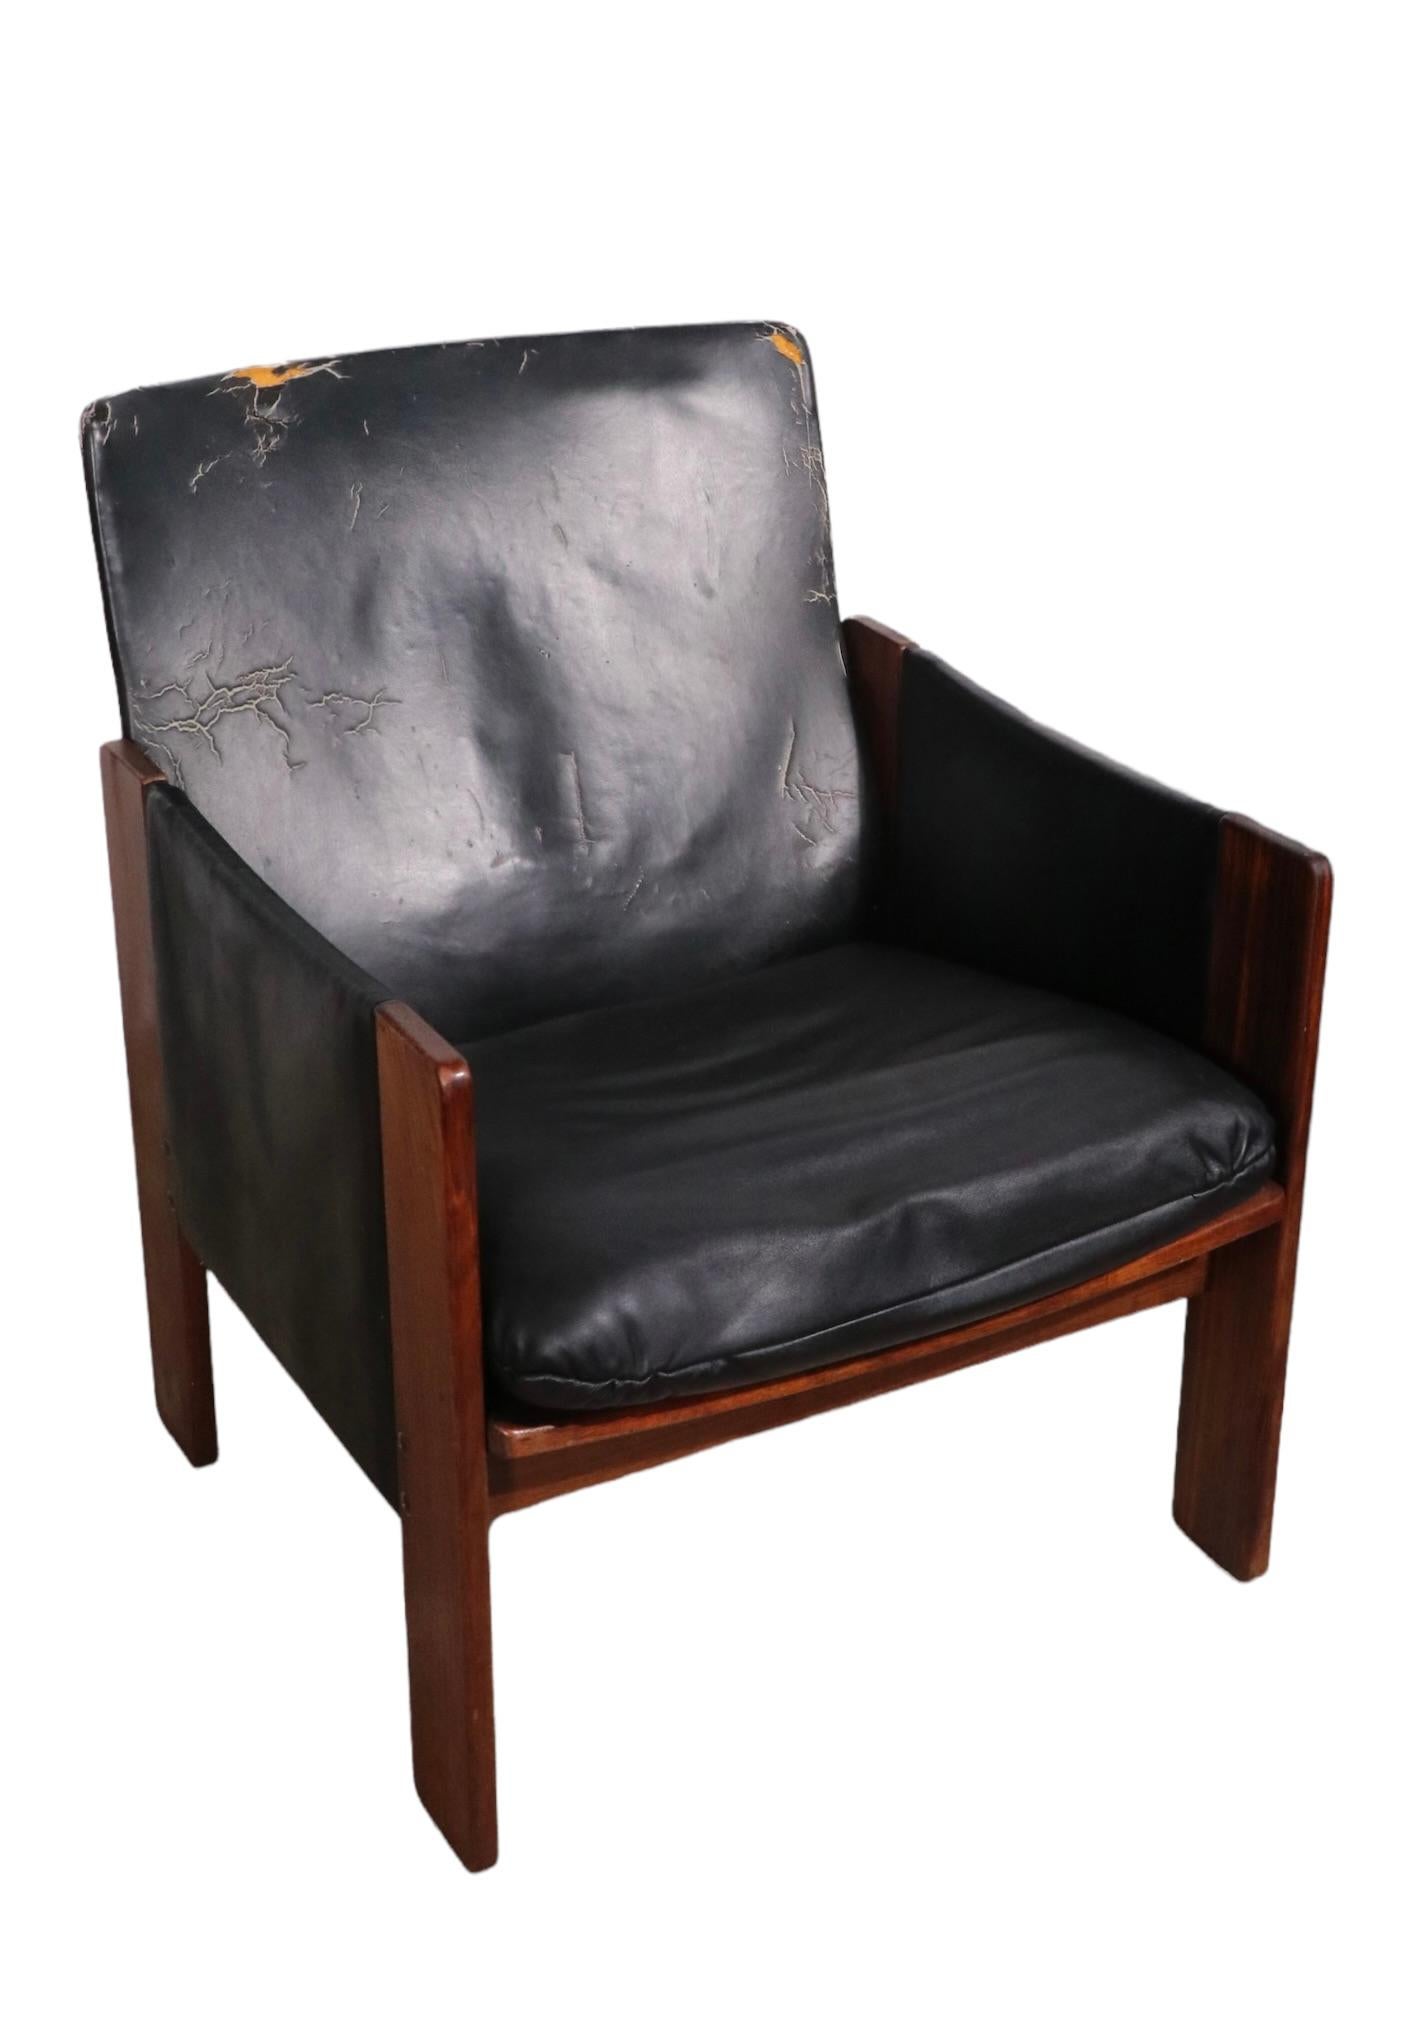 Pr. Rosewood and Leather Lounge Arm Chairs by Tobia Scarpa for Cassina For Sale 10